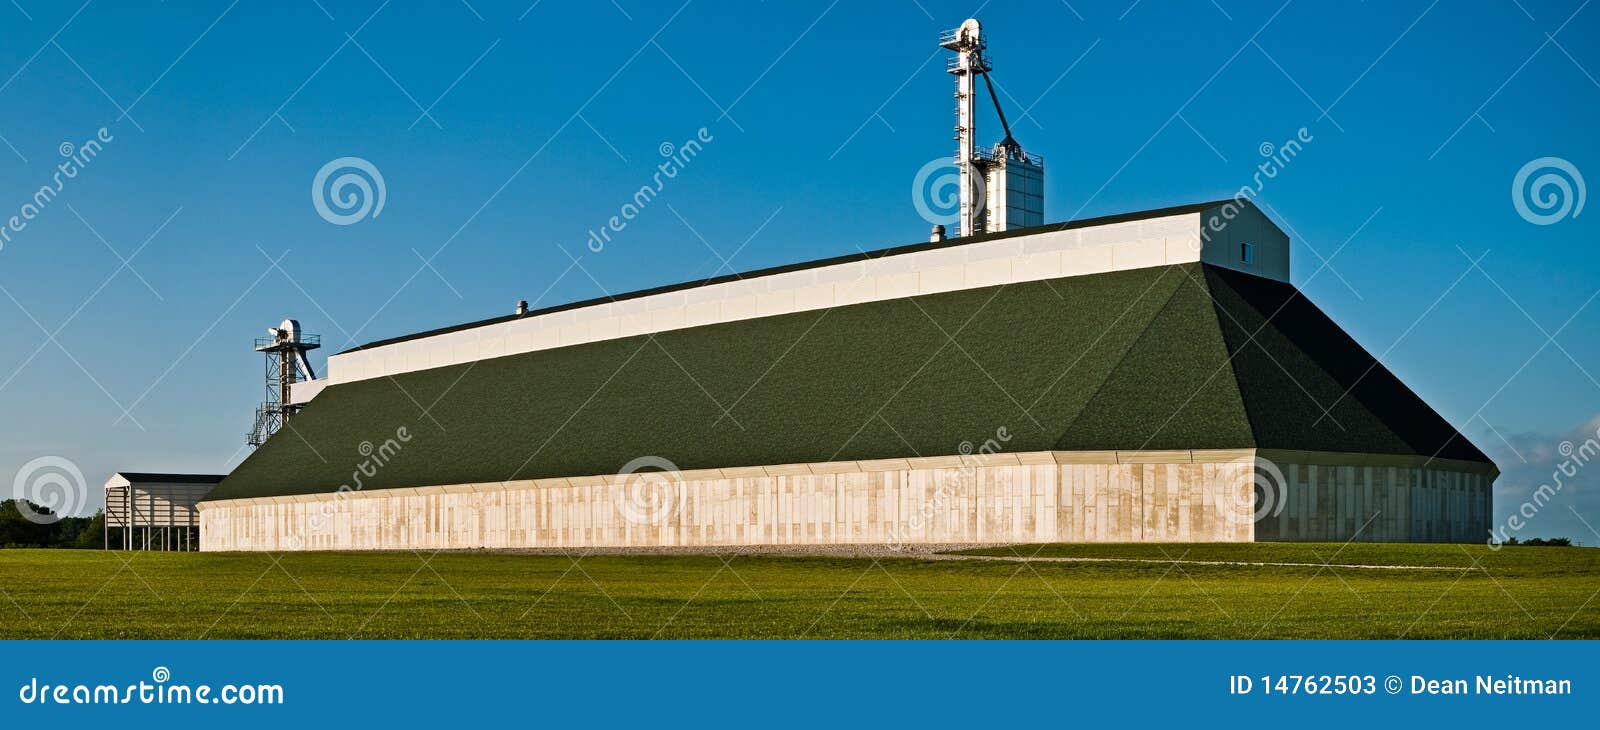 Modern Agriculture stock image. Image of building, rural - 14762503